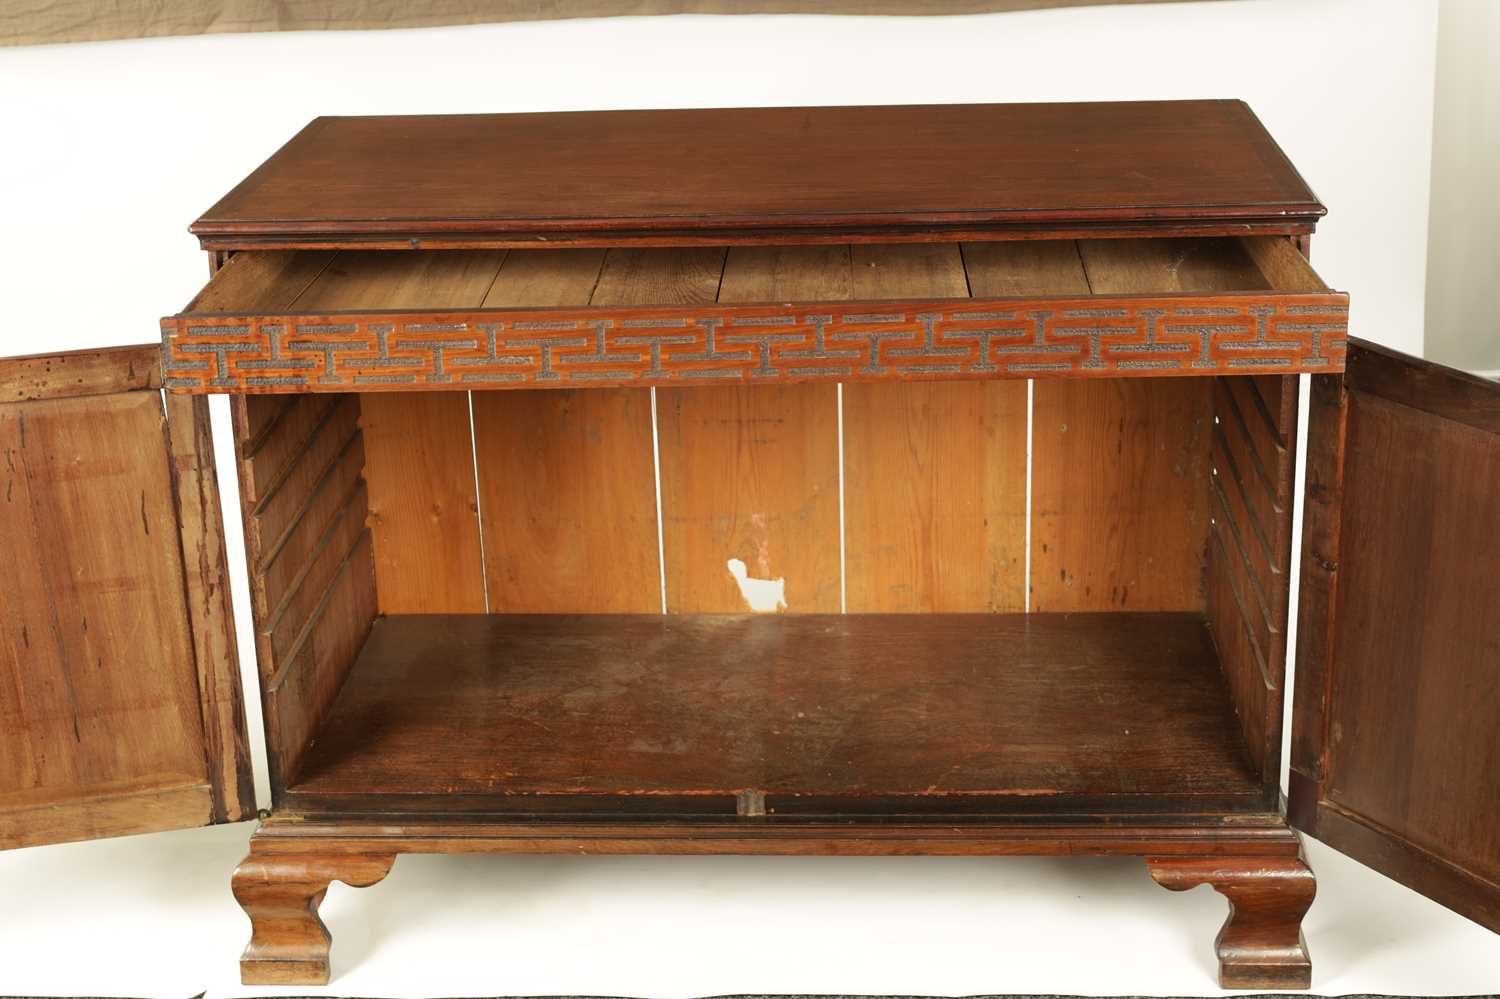 AN UNUSUAL MID 18TH CENTURY CHIPPENDALE DESIGN MAHOGANY FOLIO CABINET - Image 7 of 18